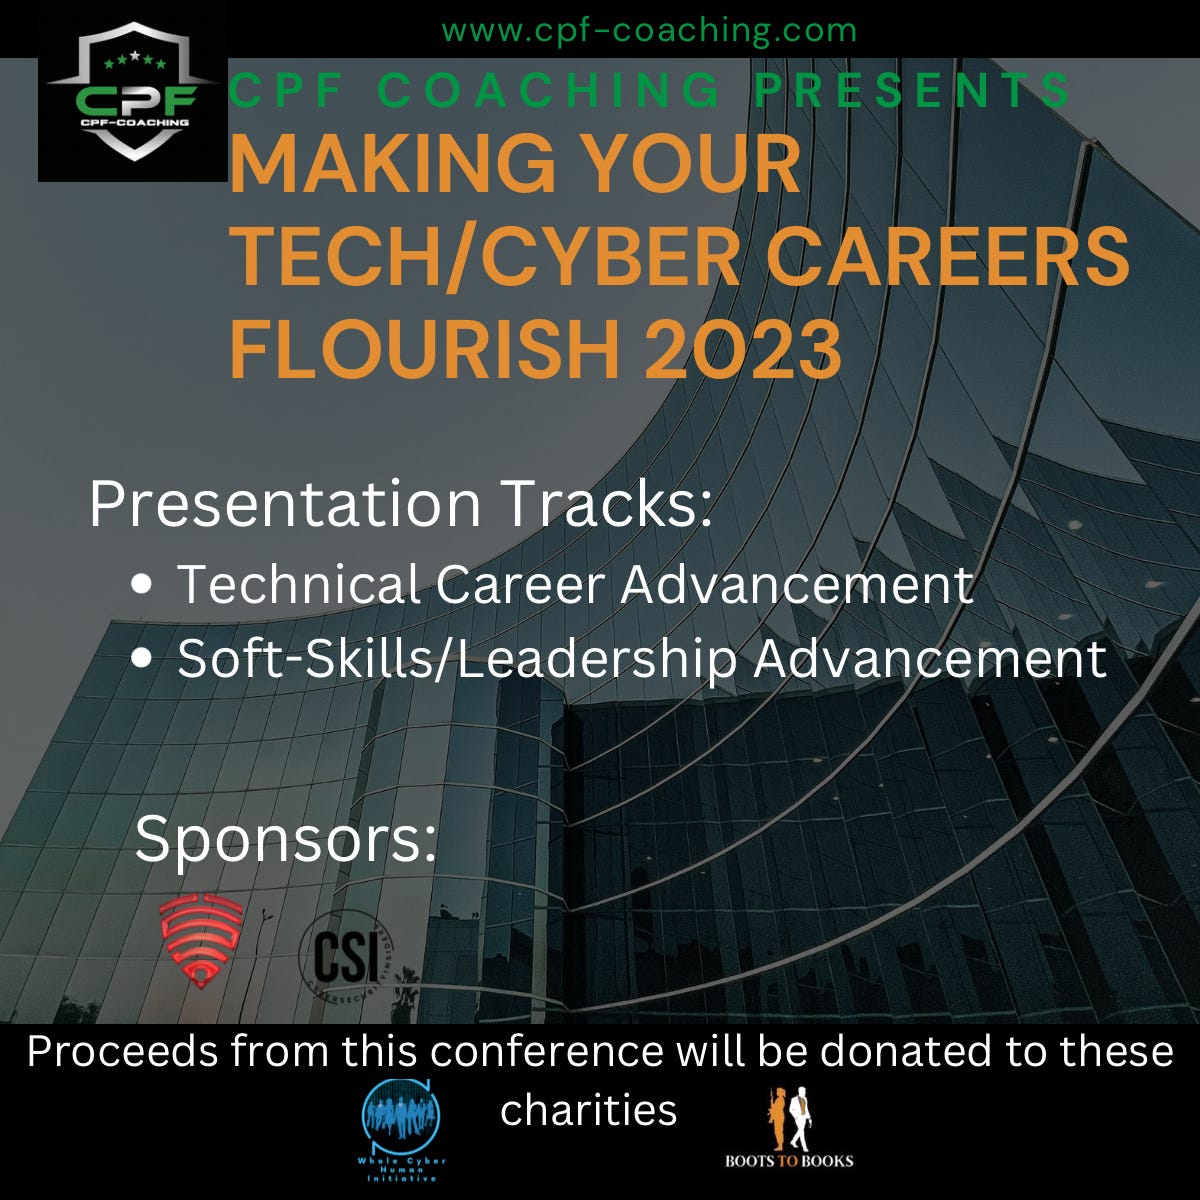 The "Making our Tech/Cyber Career Flourish 2023" virtual conference is just around the corner on January 27th